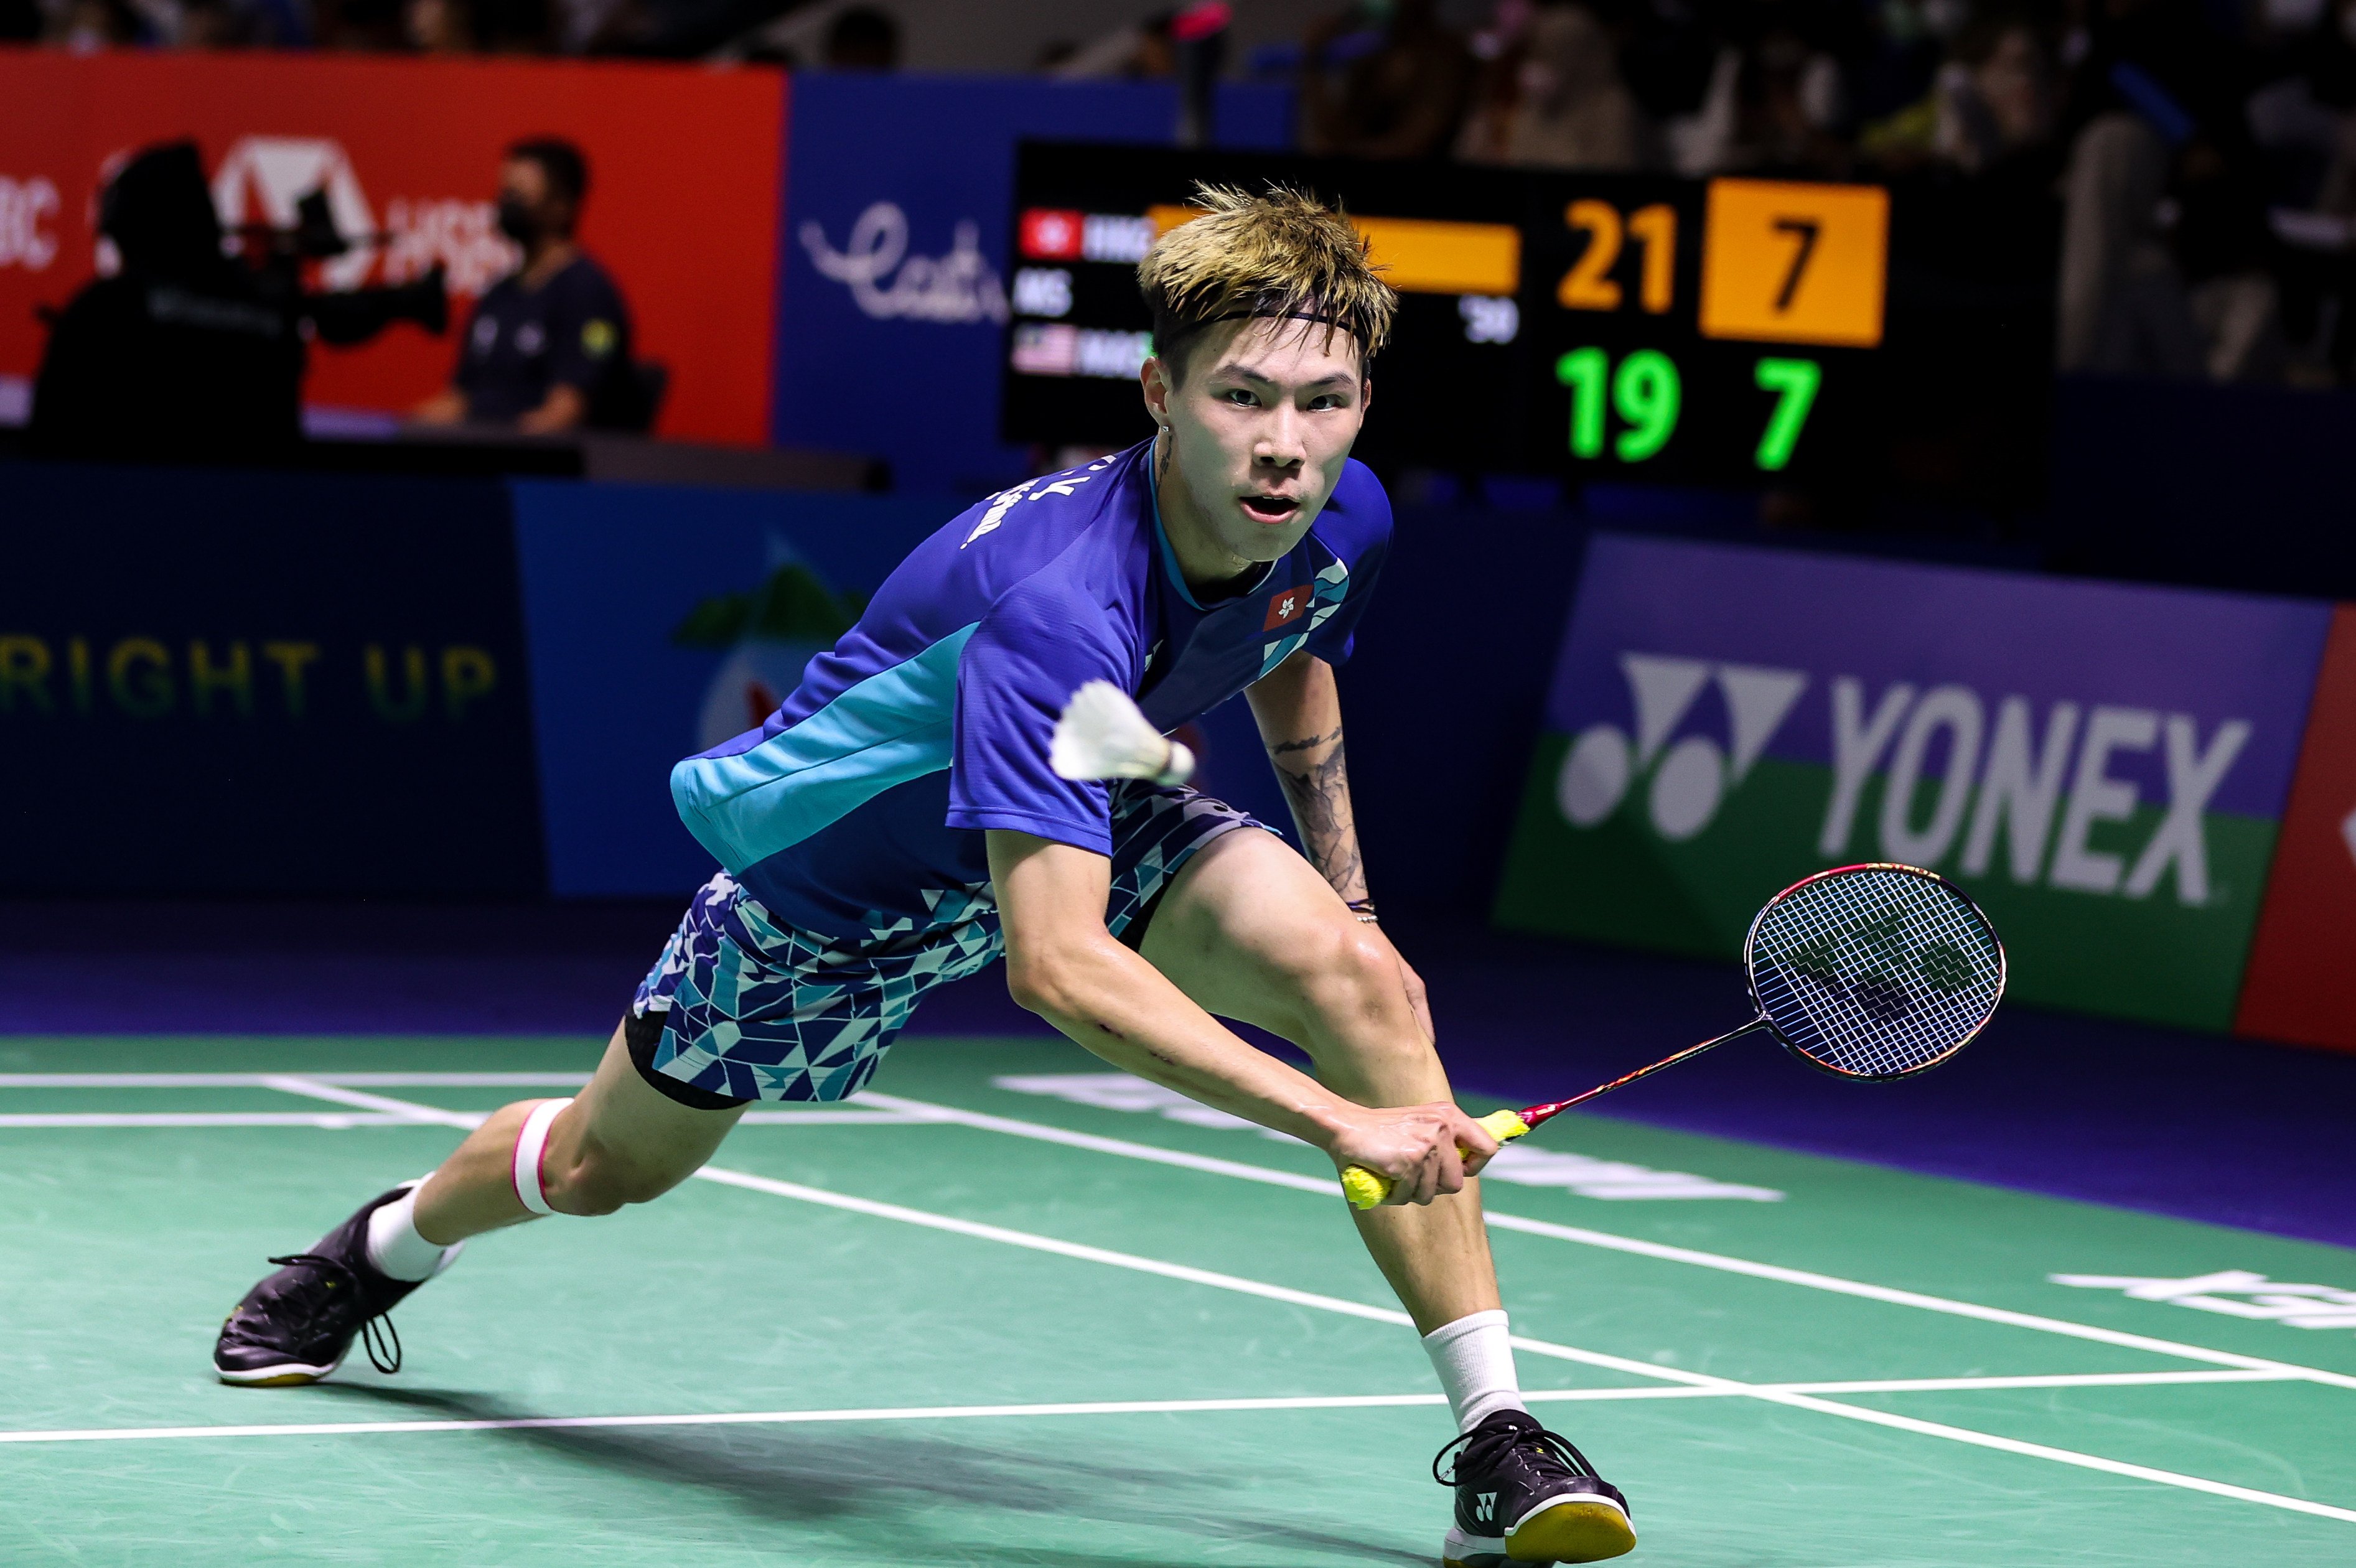 Lee Cheuk-yiu in his victory over Darren Liew of Malaysia at the Indonesia Open. Photo: Badmintonphoto